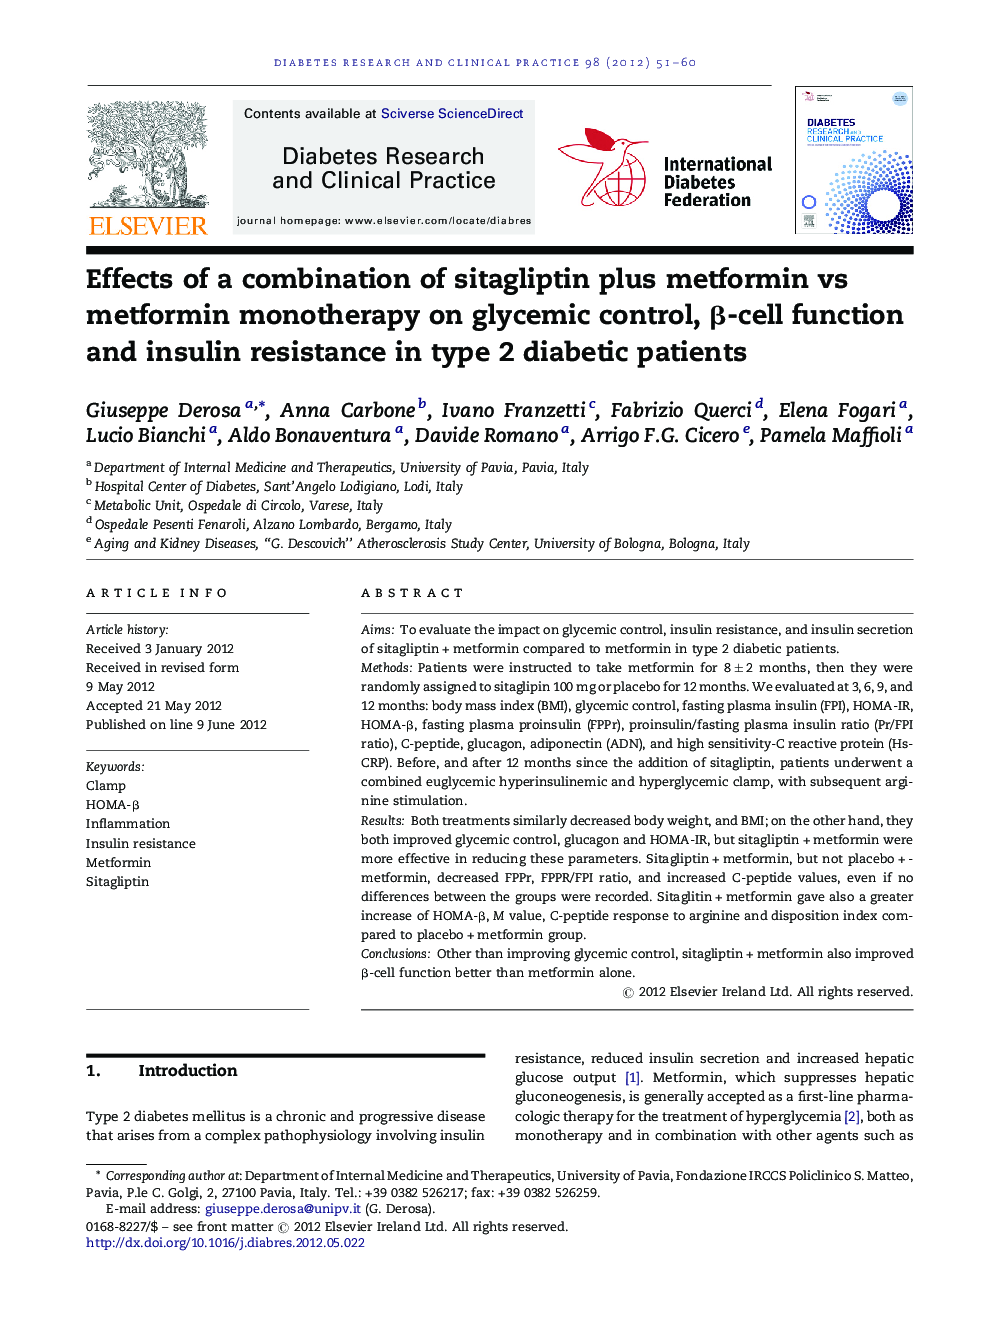 Effects of a combination of sitagliptin plus metformin vs metformin monotherapy on glycemic control, Î²-cell function and insulin resistance in type 2 diabetic patients